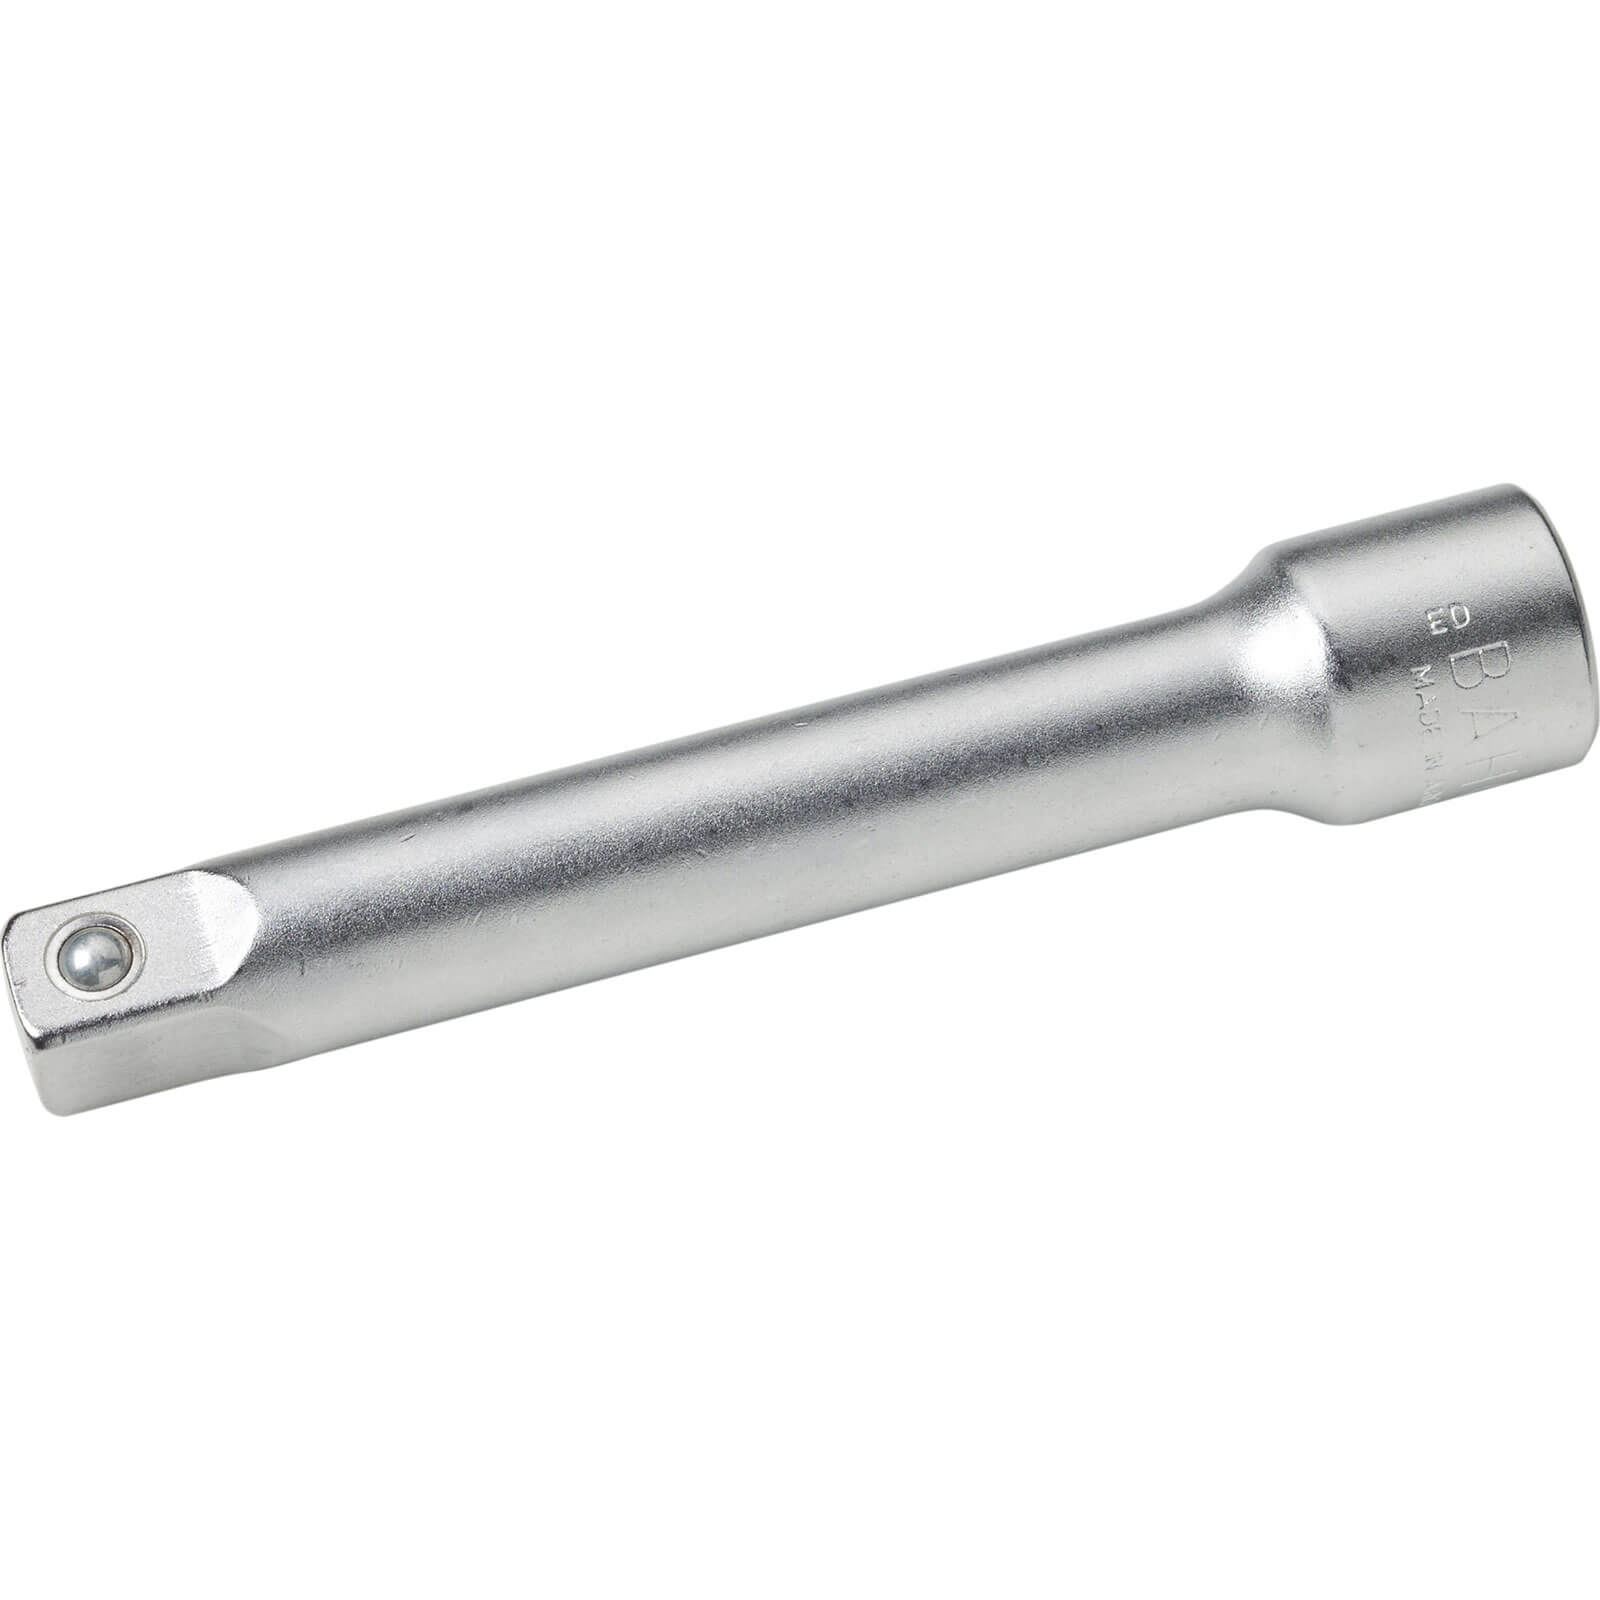 Bahco Extension Bar 3" 3/8" Square Drive Sbs760